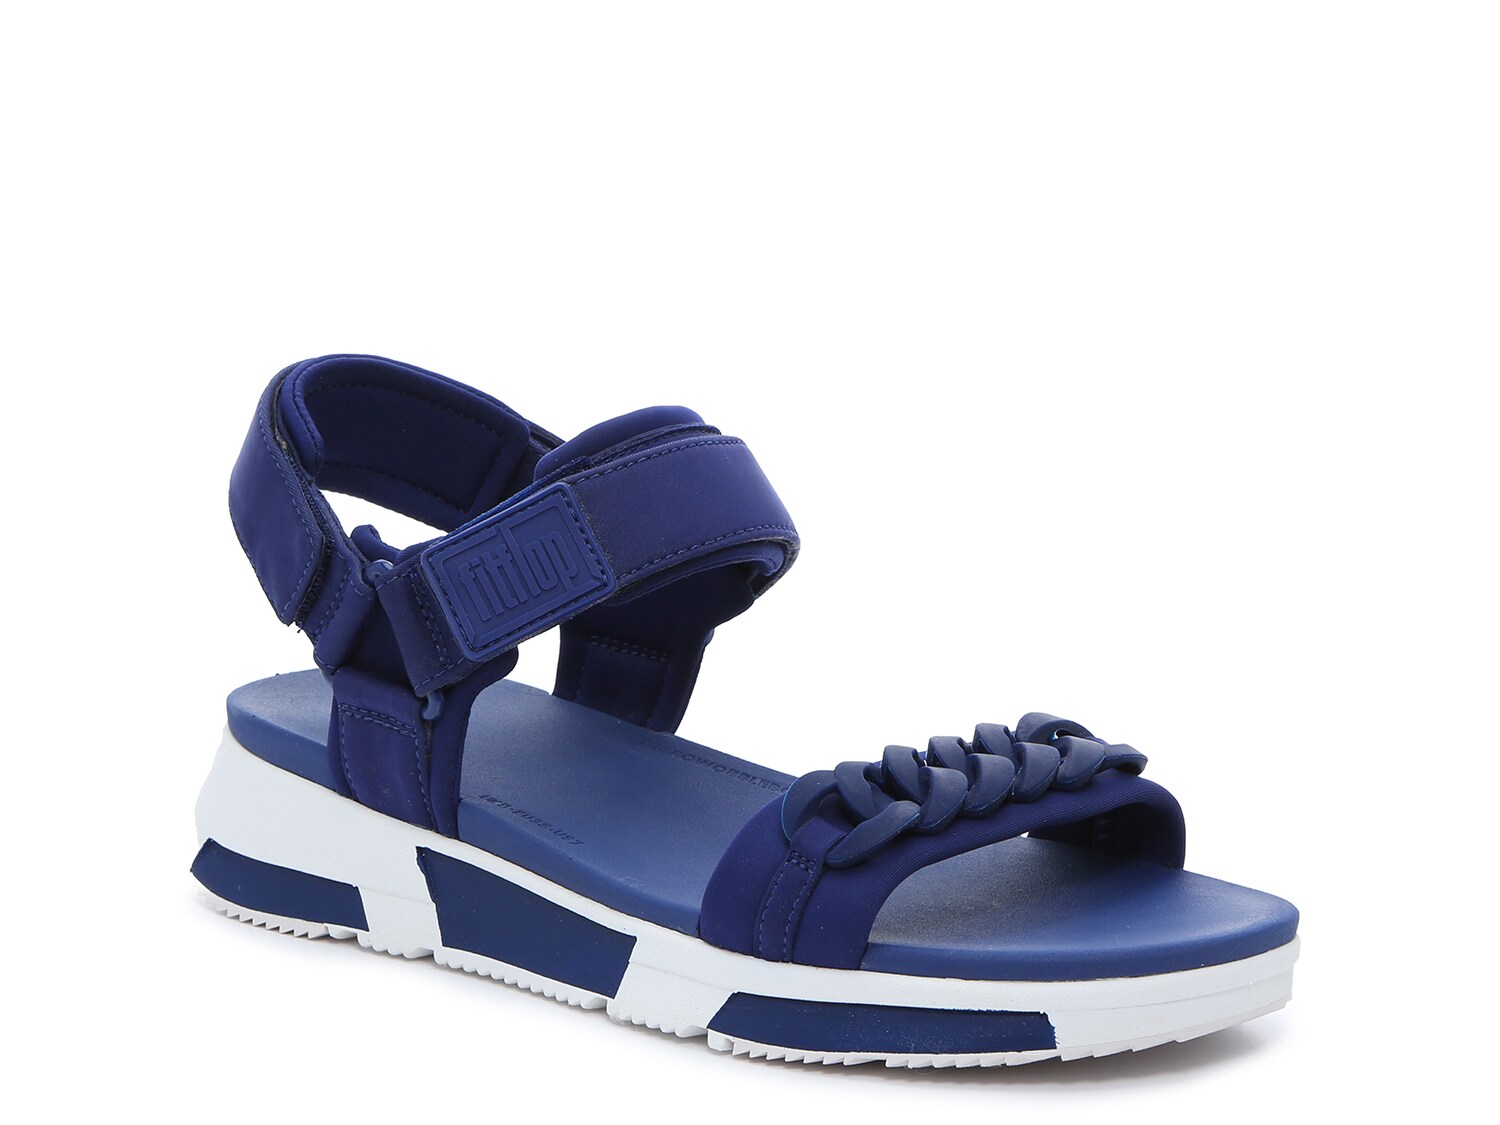 FitFlop Heda Sandal - Free Shipping | DSW